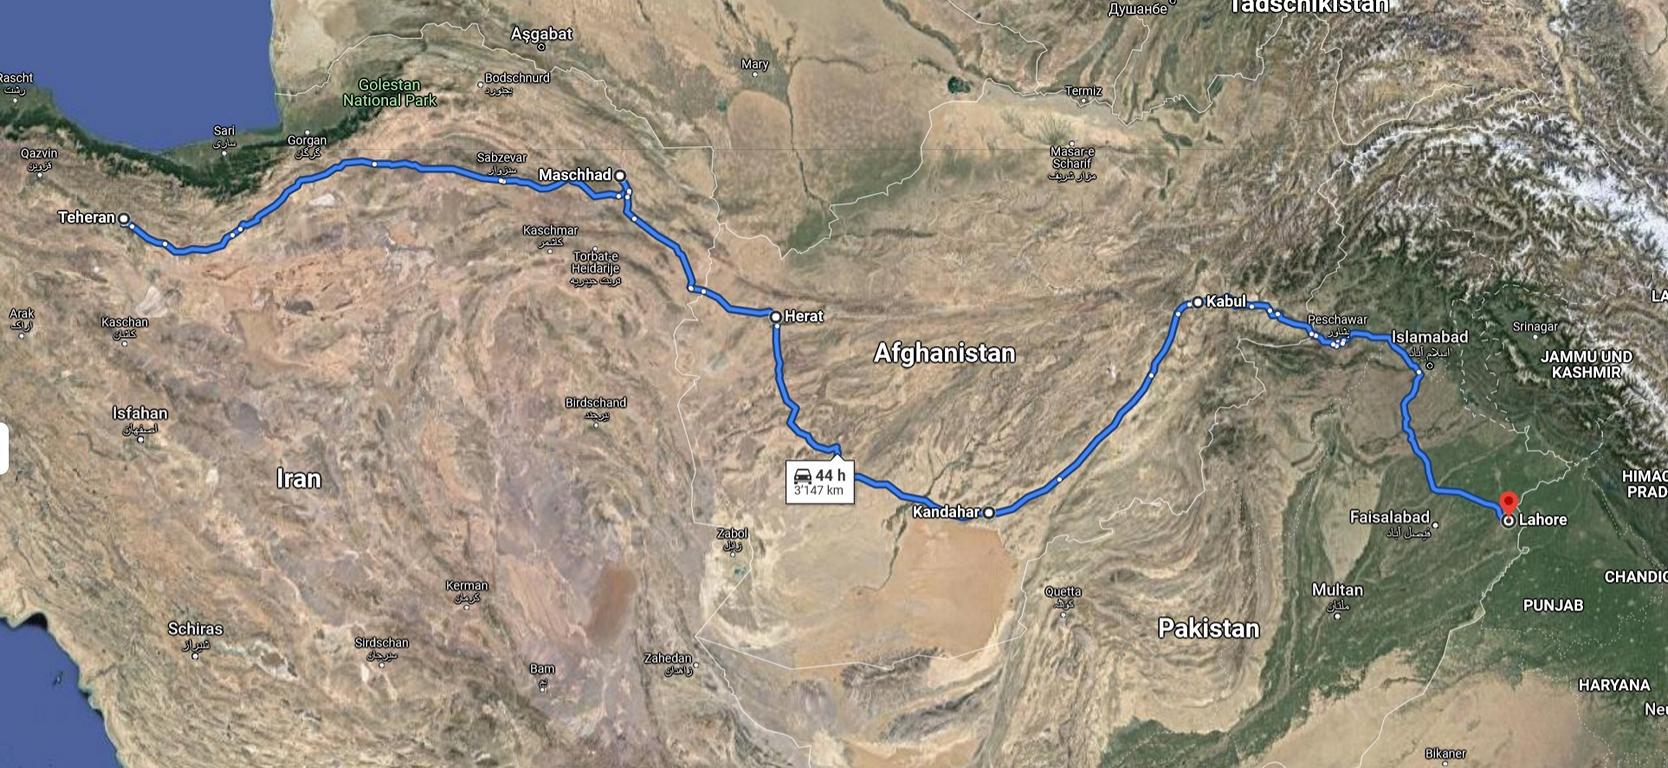 Route Part 2: from Tehran to Lahore